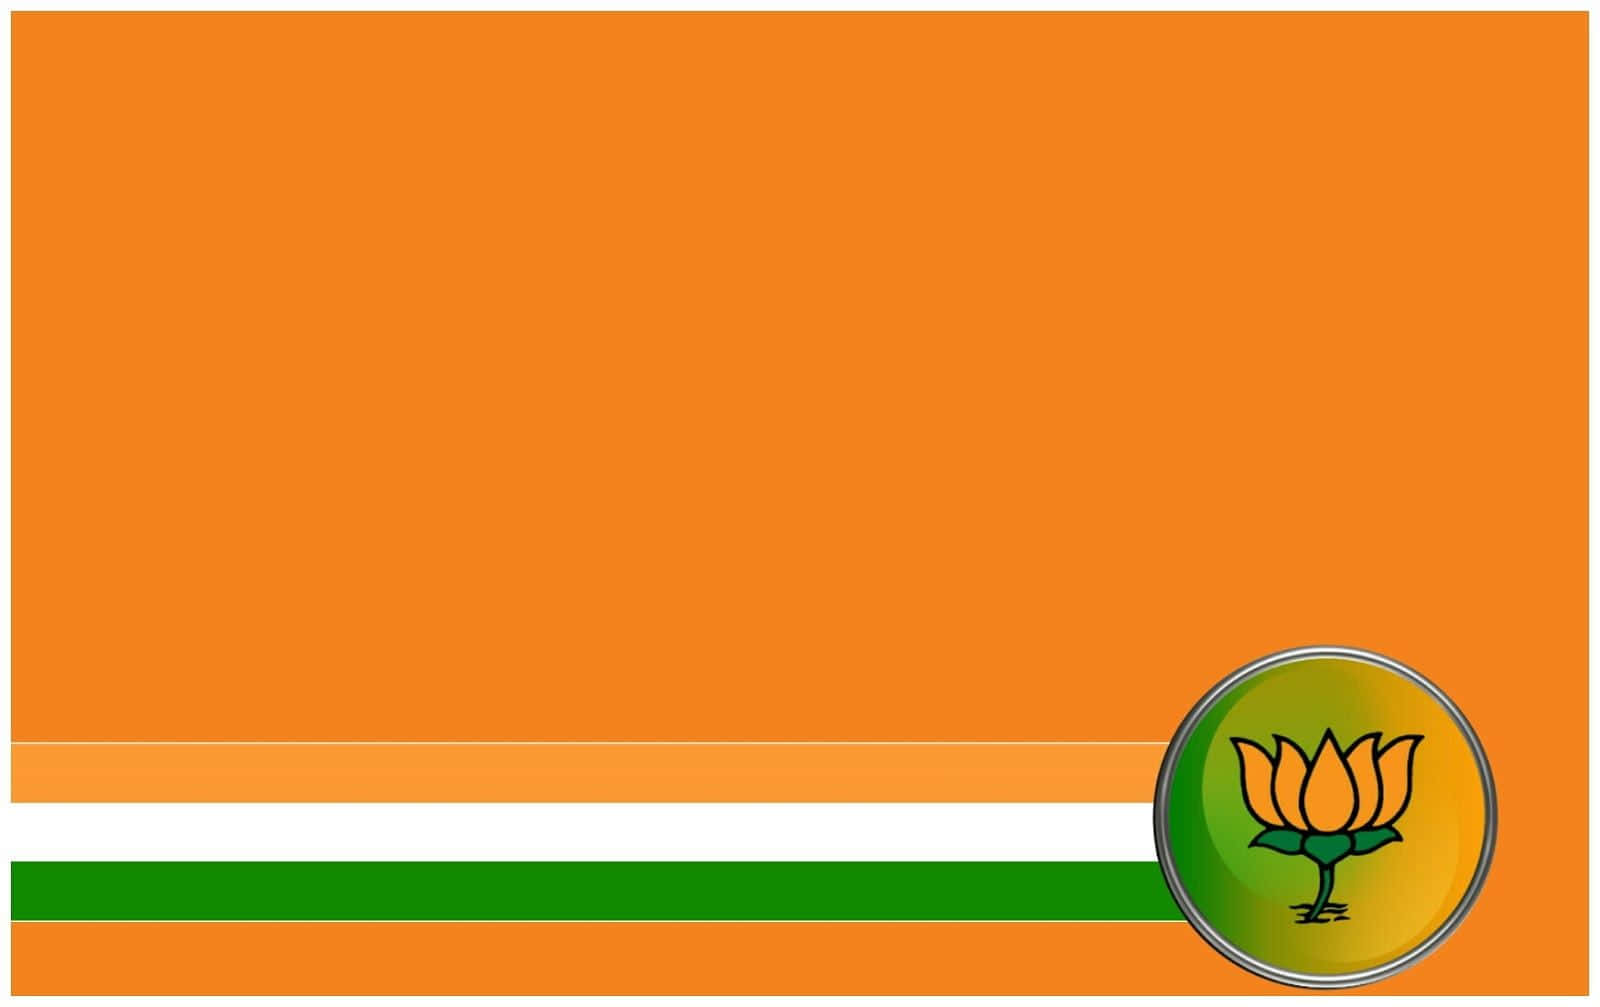 Come join the BJP family and bring about the transformation of India.